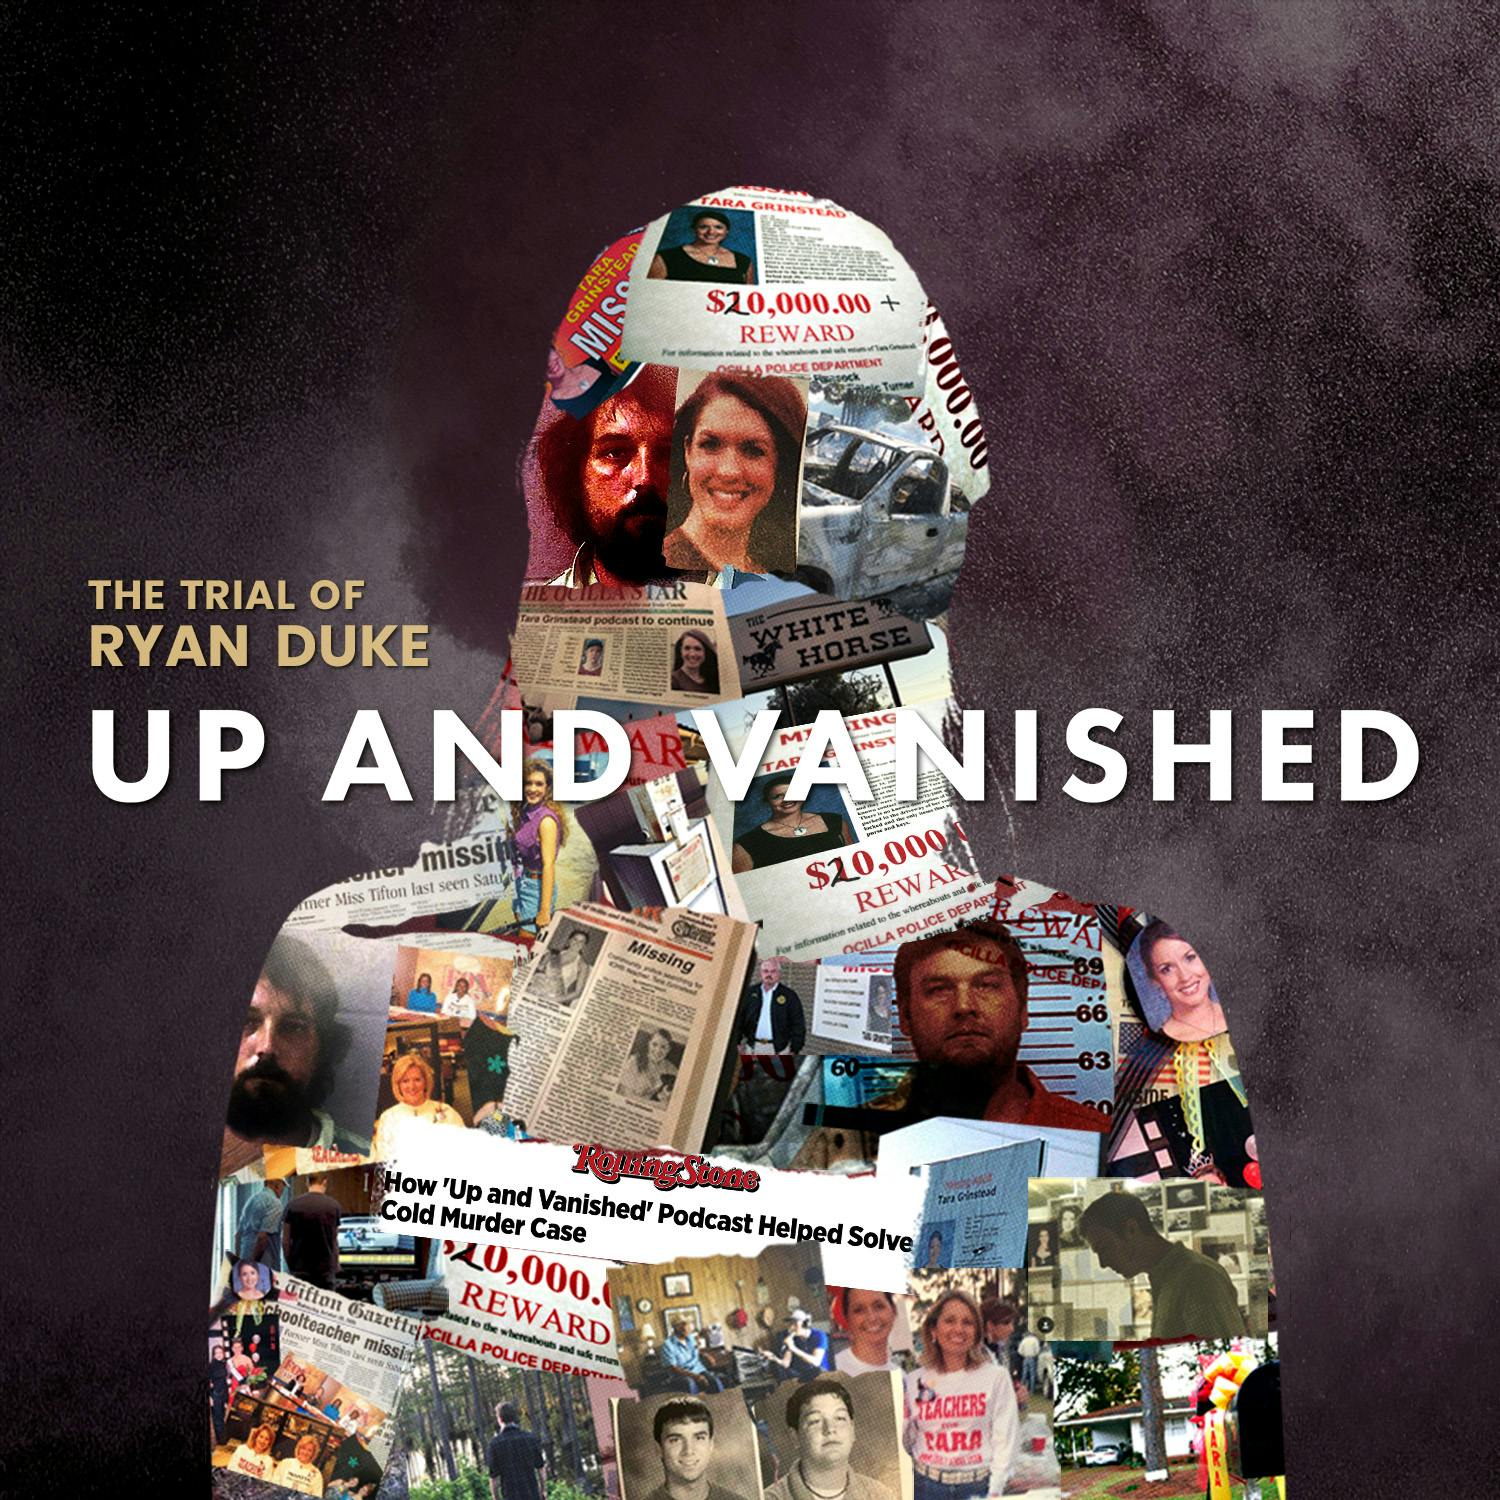 Up and Vanished podcast